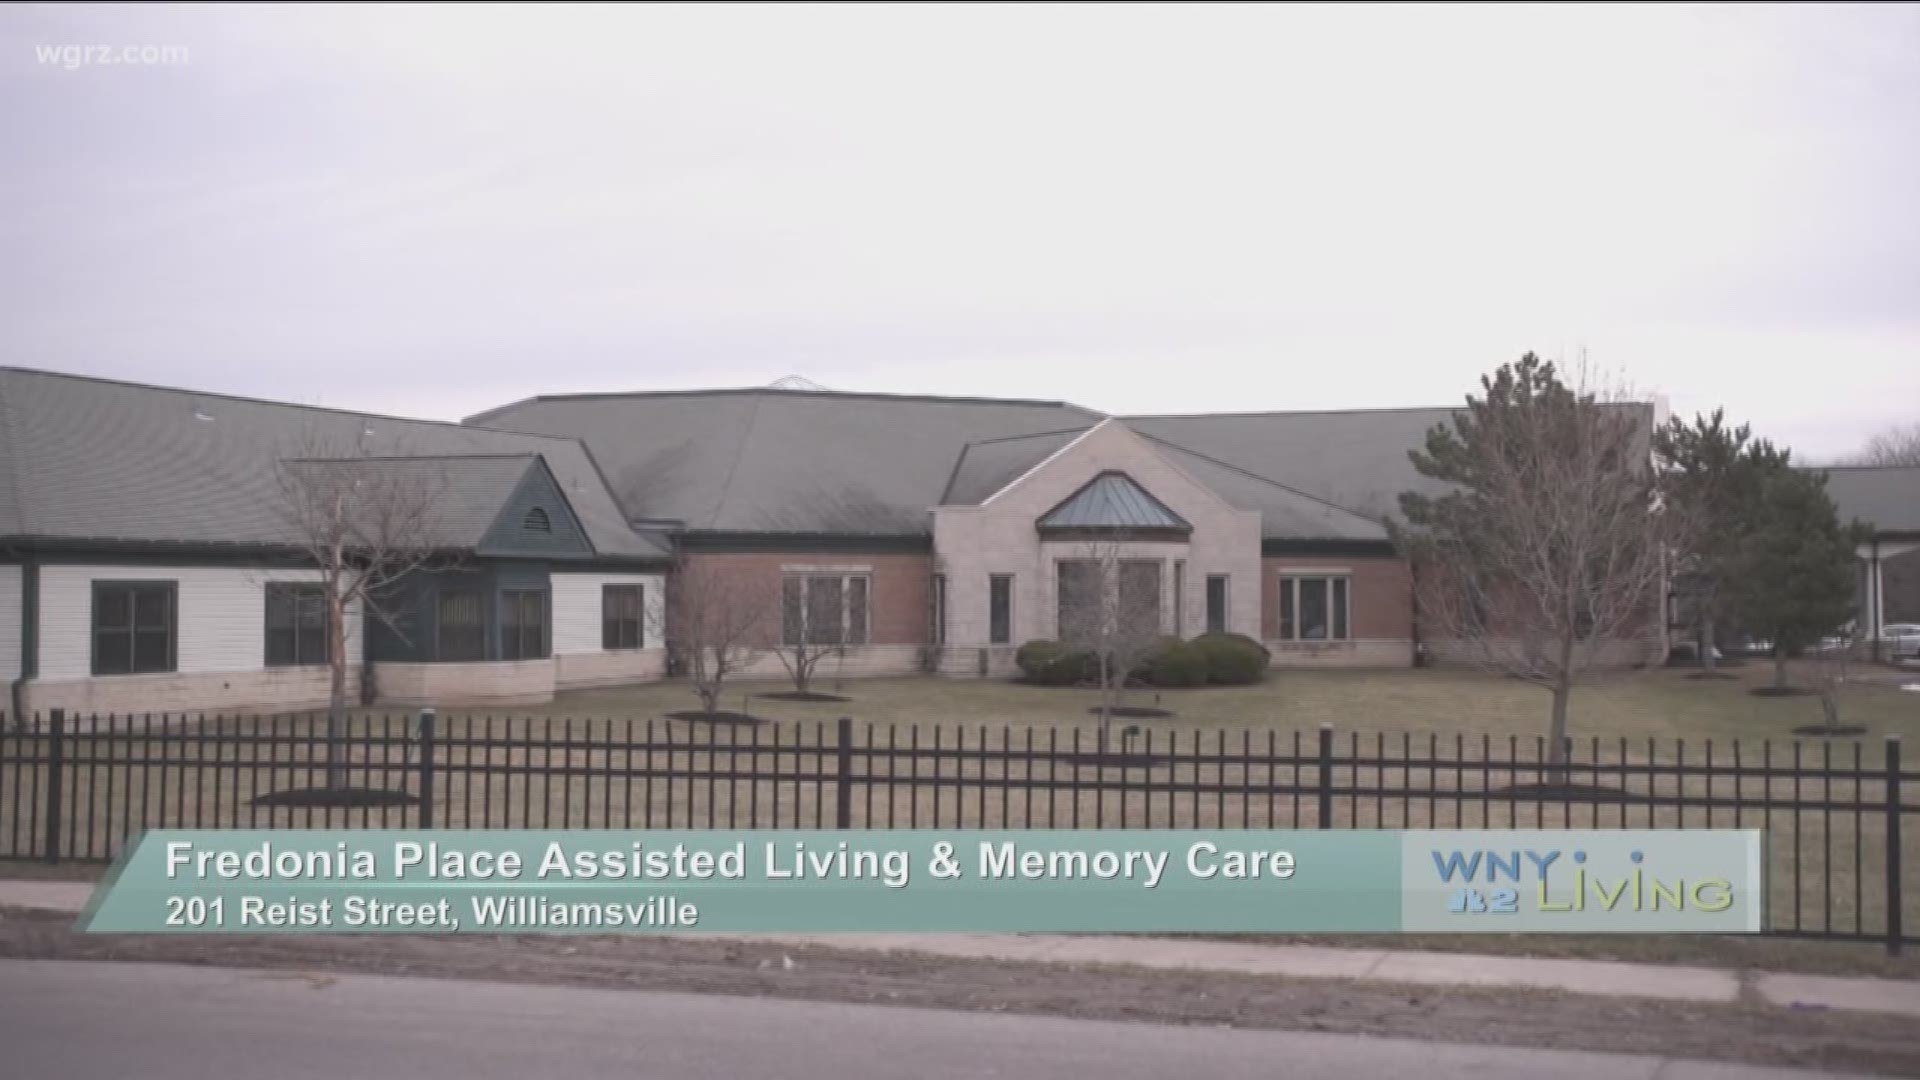 WNY Living - May 25 - Fredonia Place Assisted Living & Memory Care (SPONSORED CONTENT)